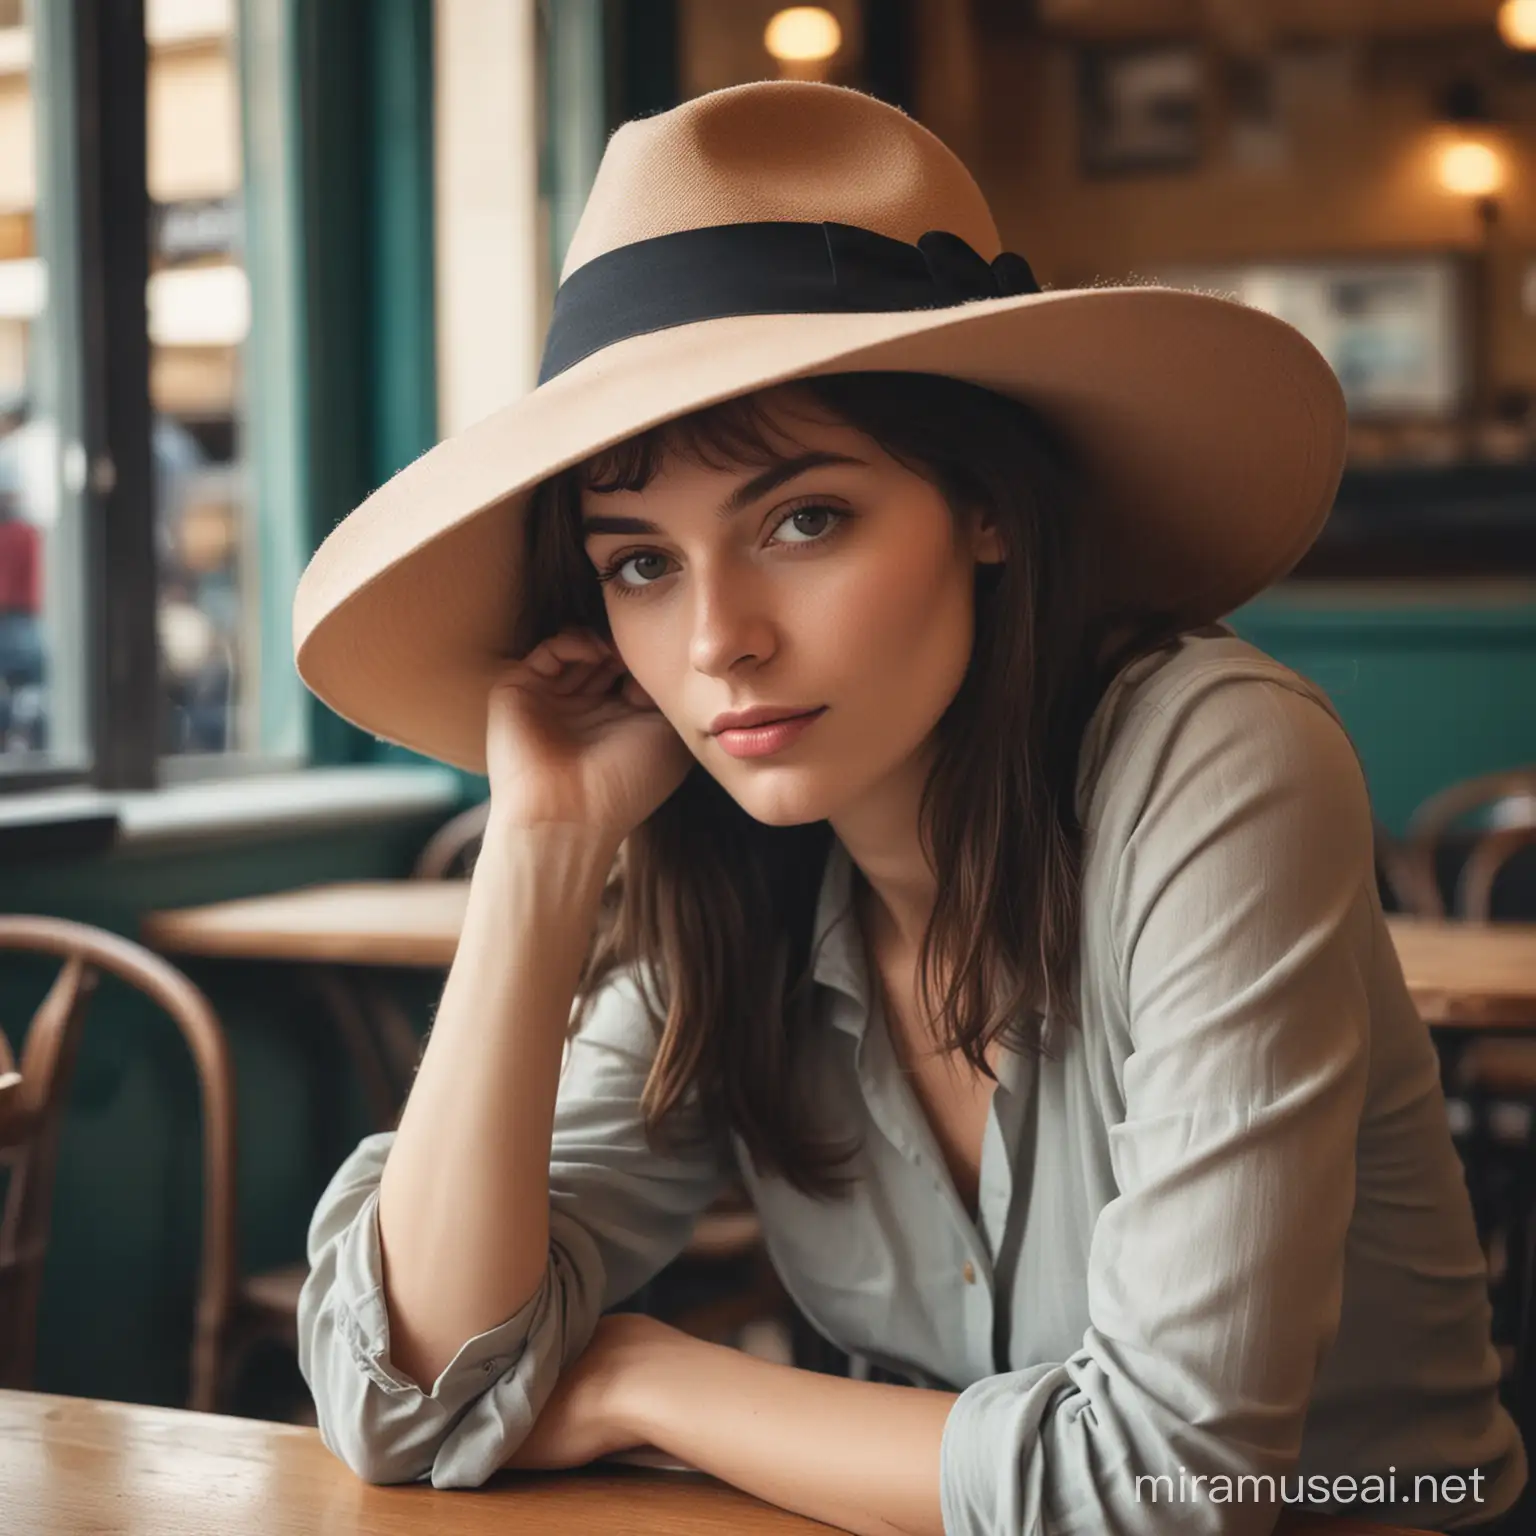 color image of a mysterious woman wearing a hat, sitting inside a French café